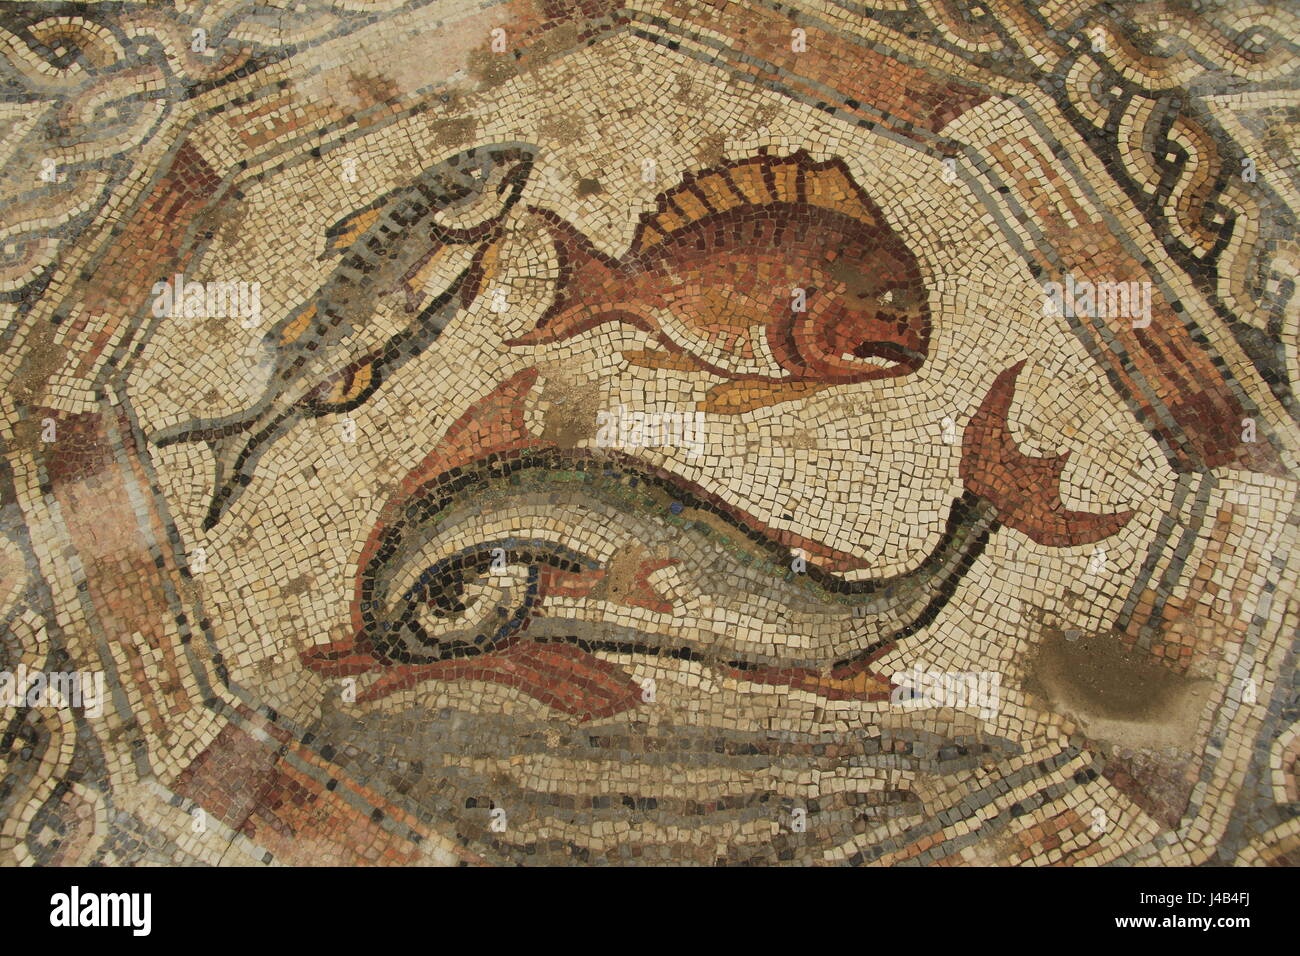 Israel, Lod, a 1,700 Year Old mosaic that was the courtyard pavement of the magnificent villa that had the famous Lod Mosaic in its living room Stock Photo